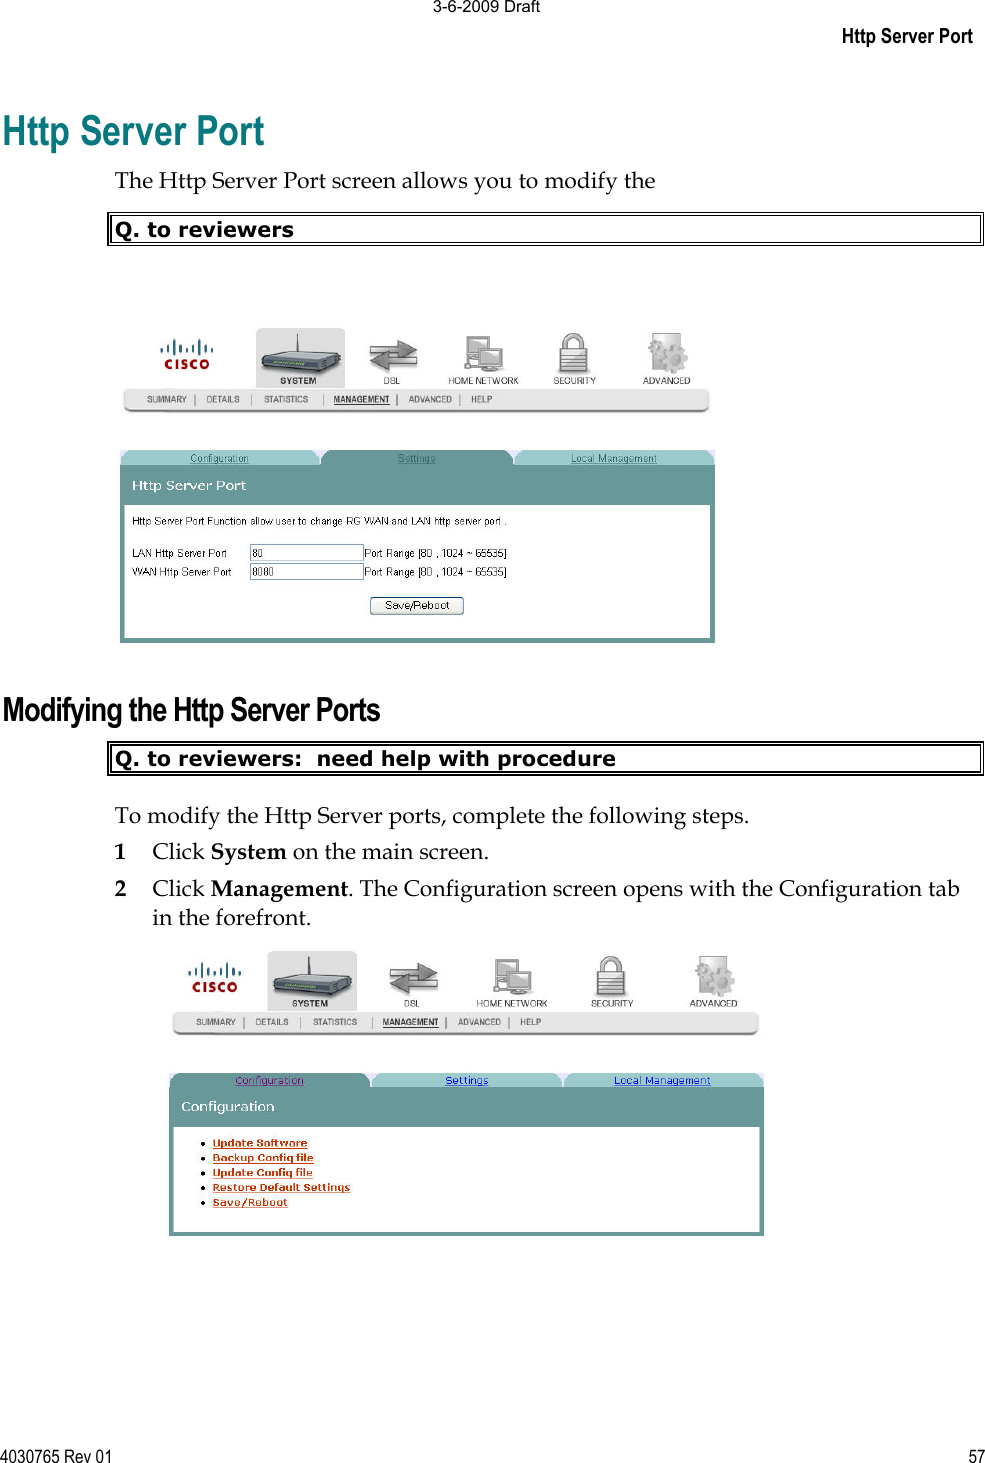 Http Server Port4030765 Rev 01 57Http Server Port The Http Server Port screen allows you to modify the  Q. to reviewers Modifying the Http Server Ports Q. to reviewers:  need help with procedure To modify the Http Server ports, complete the following steps. 1Click System on the main screen.  2Click Management. The Configuration screen opens with the Configuration tab in the forefront. 3-6-2009 Draft